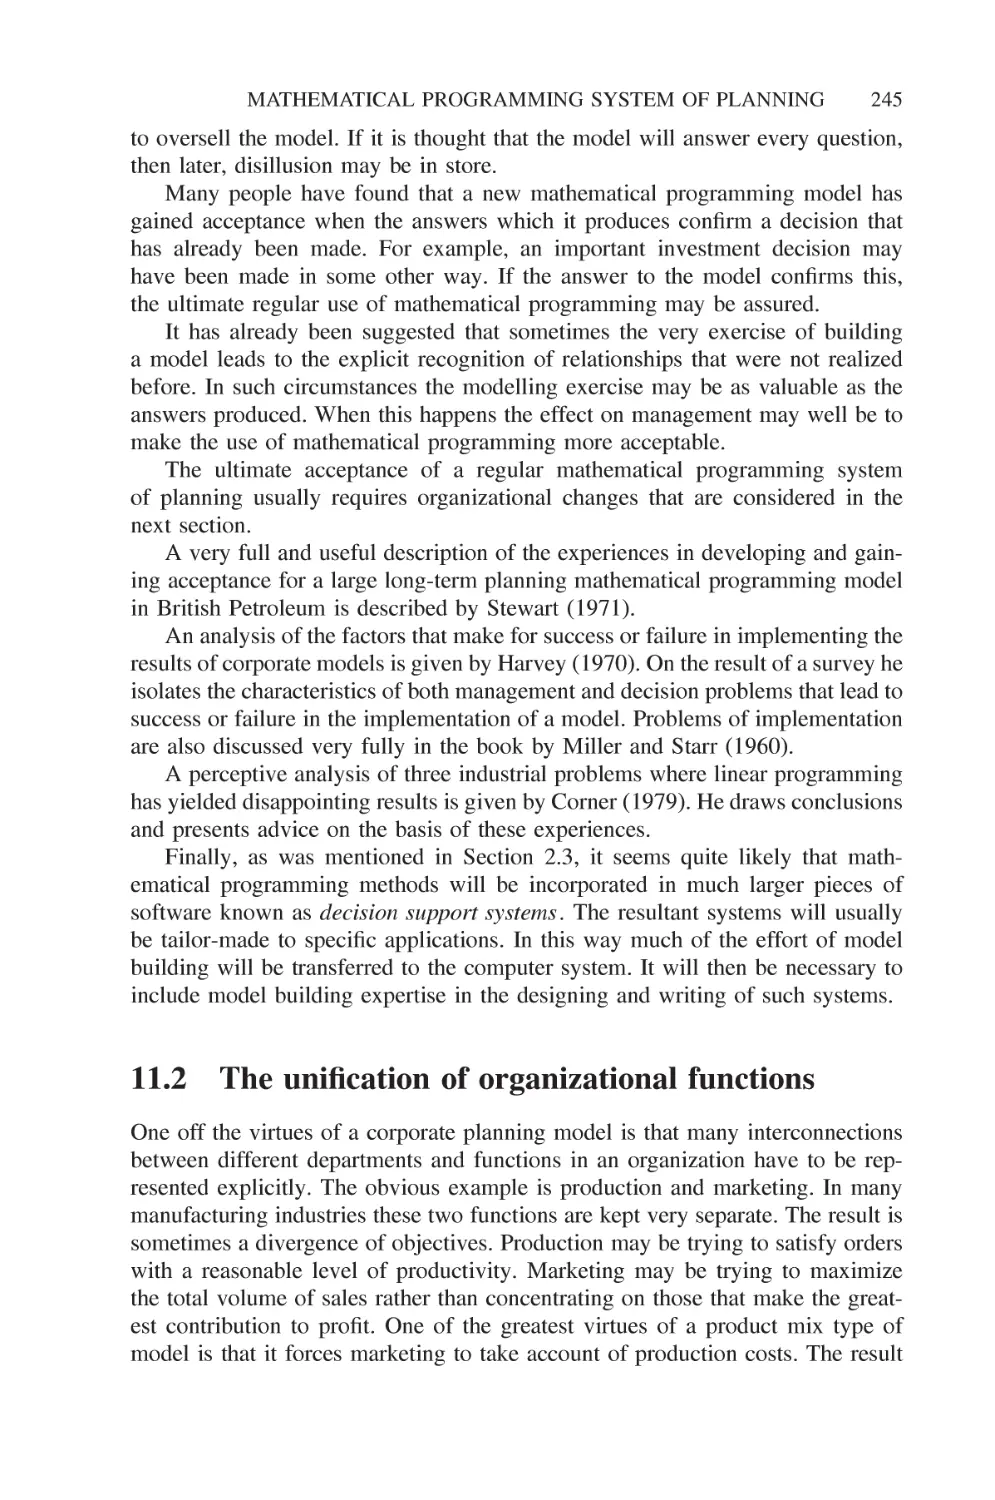 11.2 The unification of organizational functions